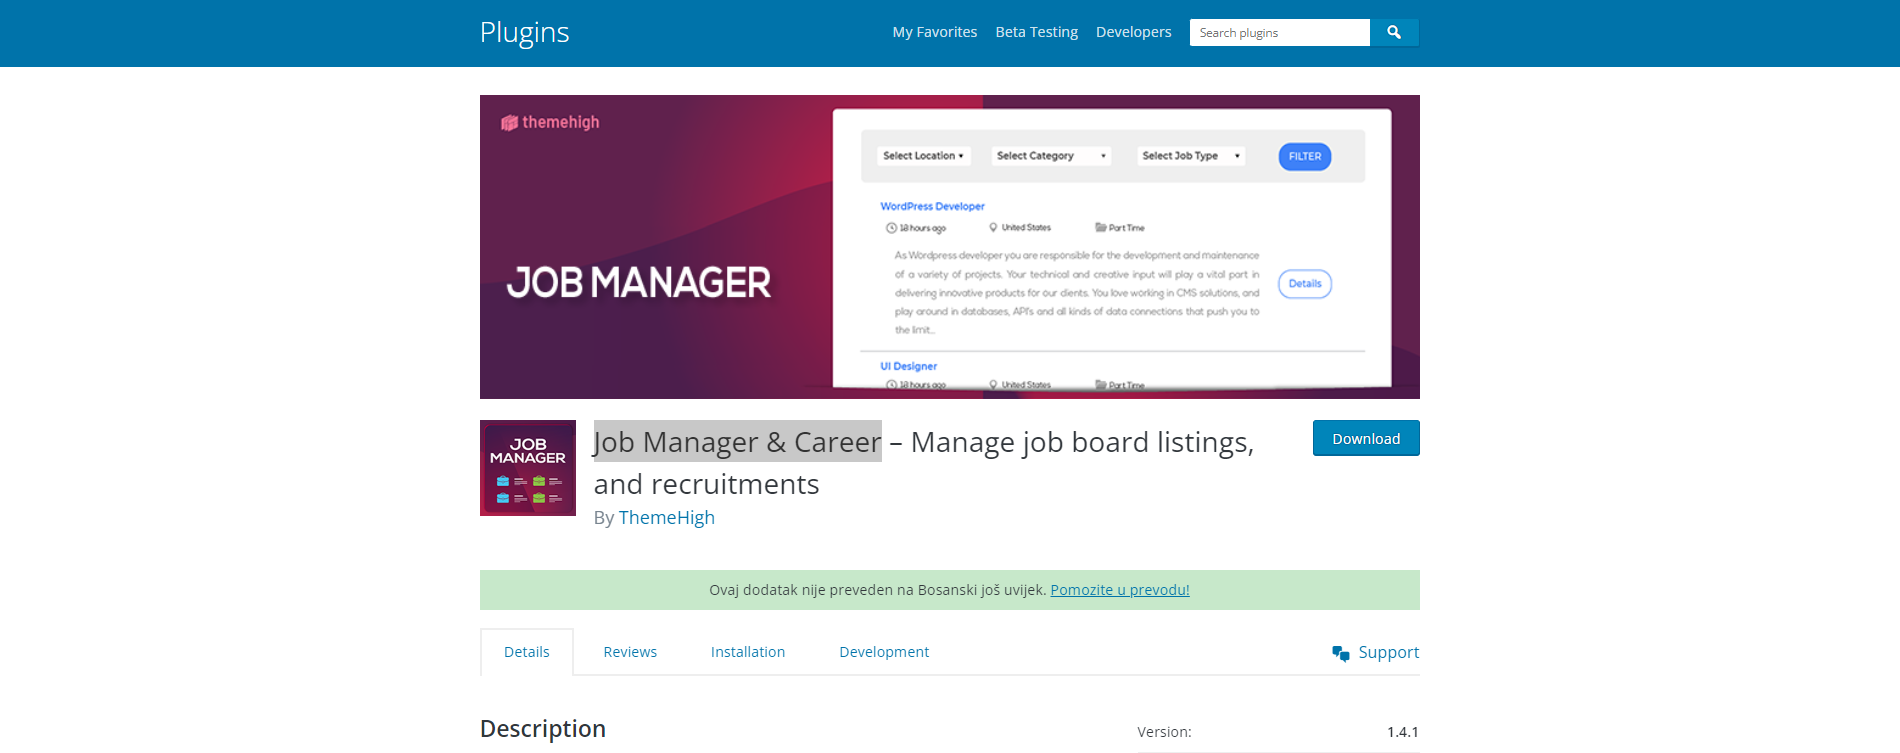 Job Manager and Career